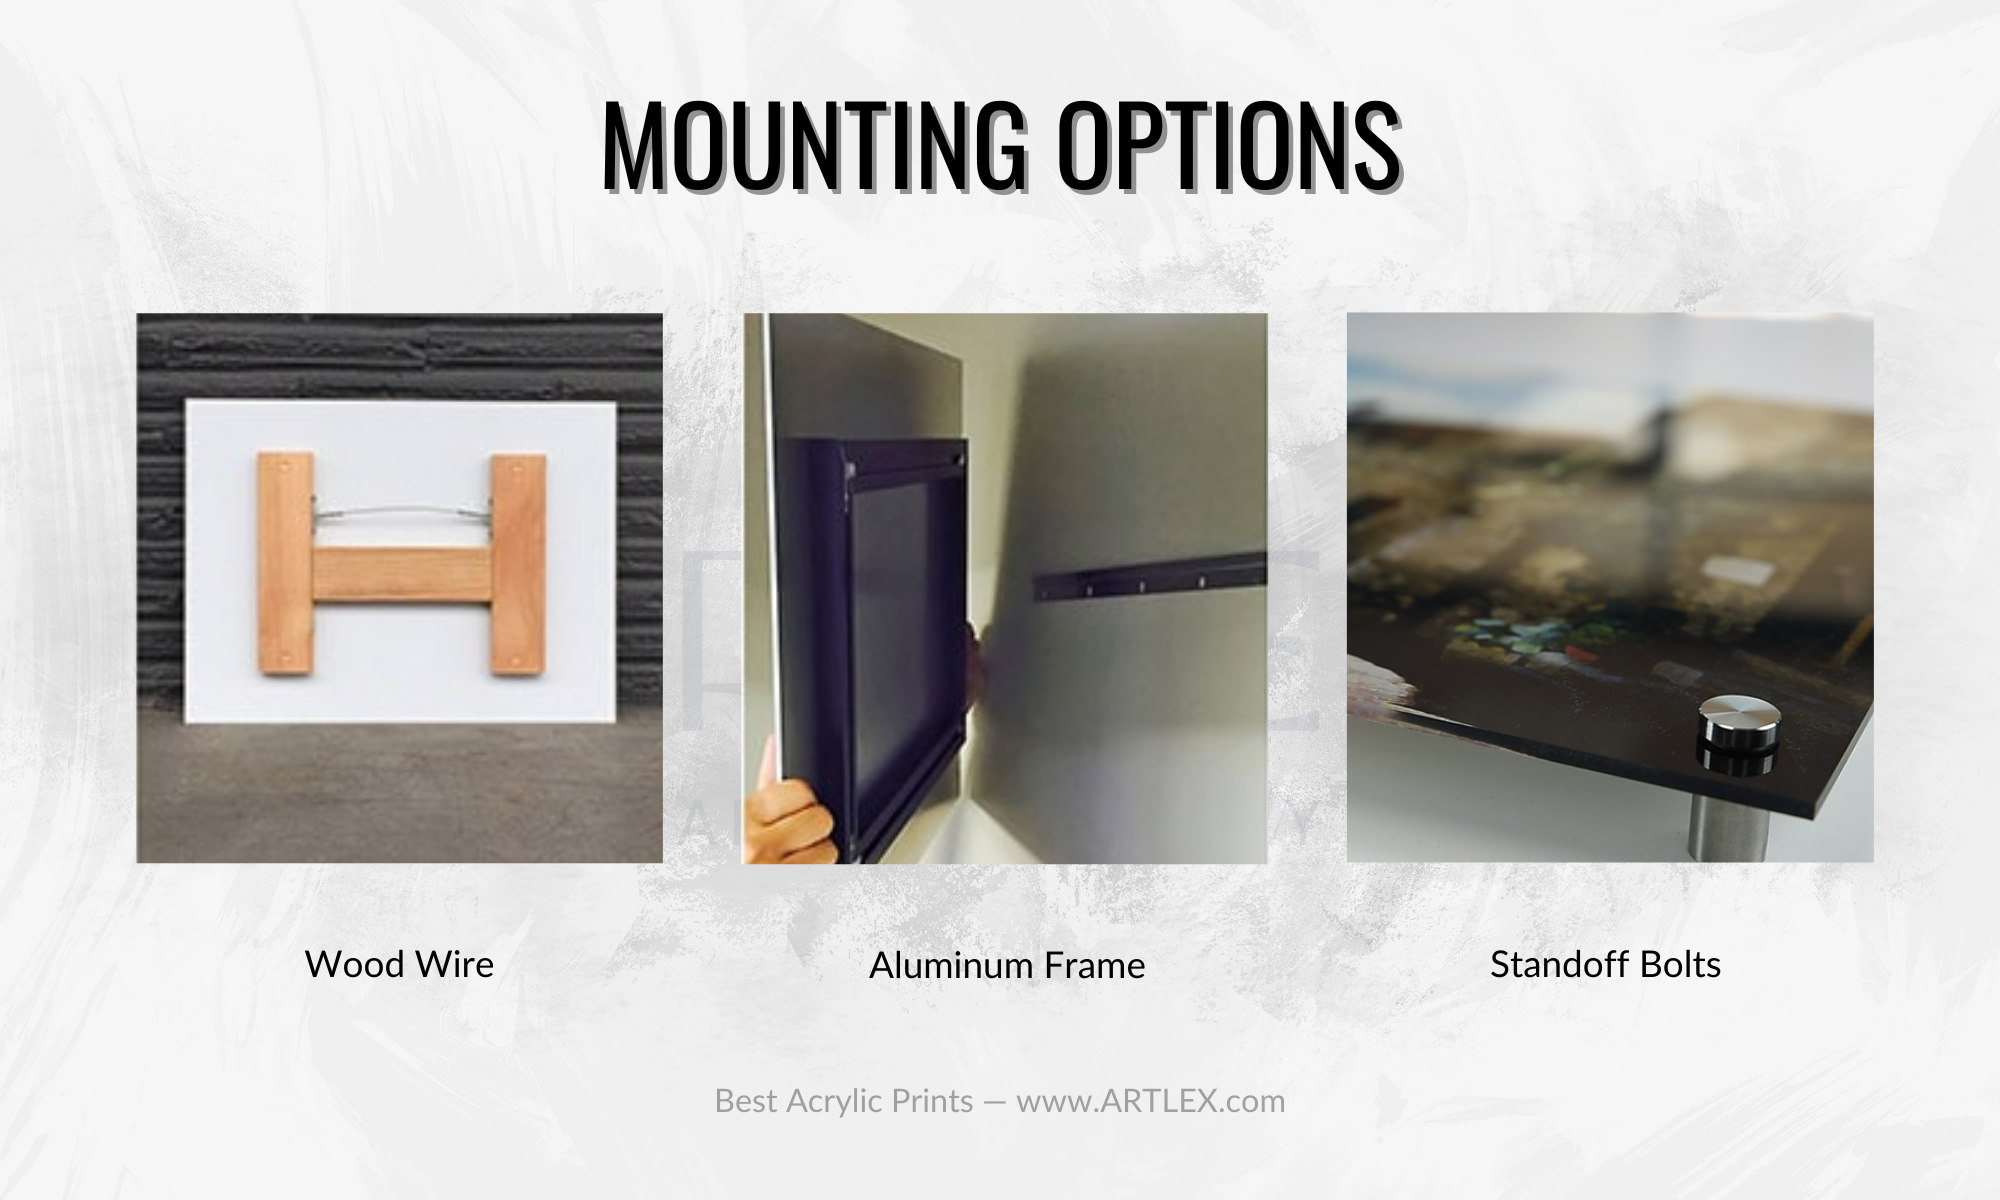 Mounting Options for Acrylic Prints